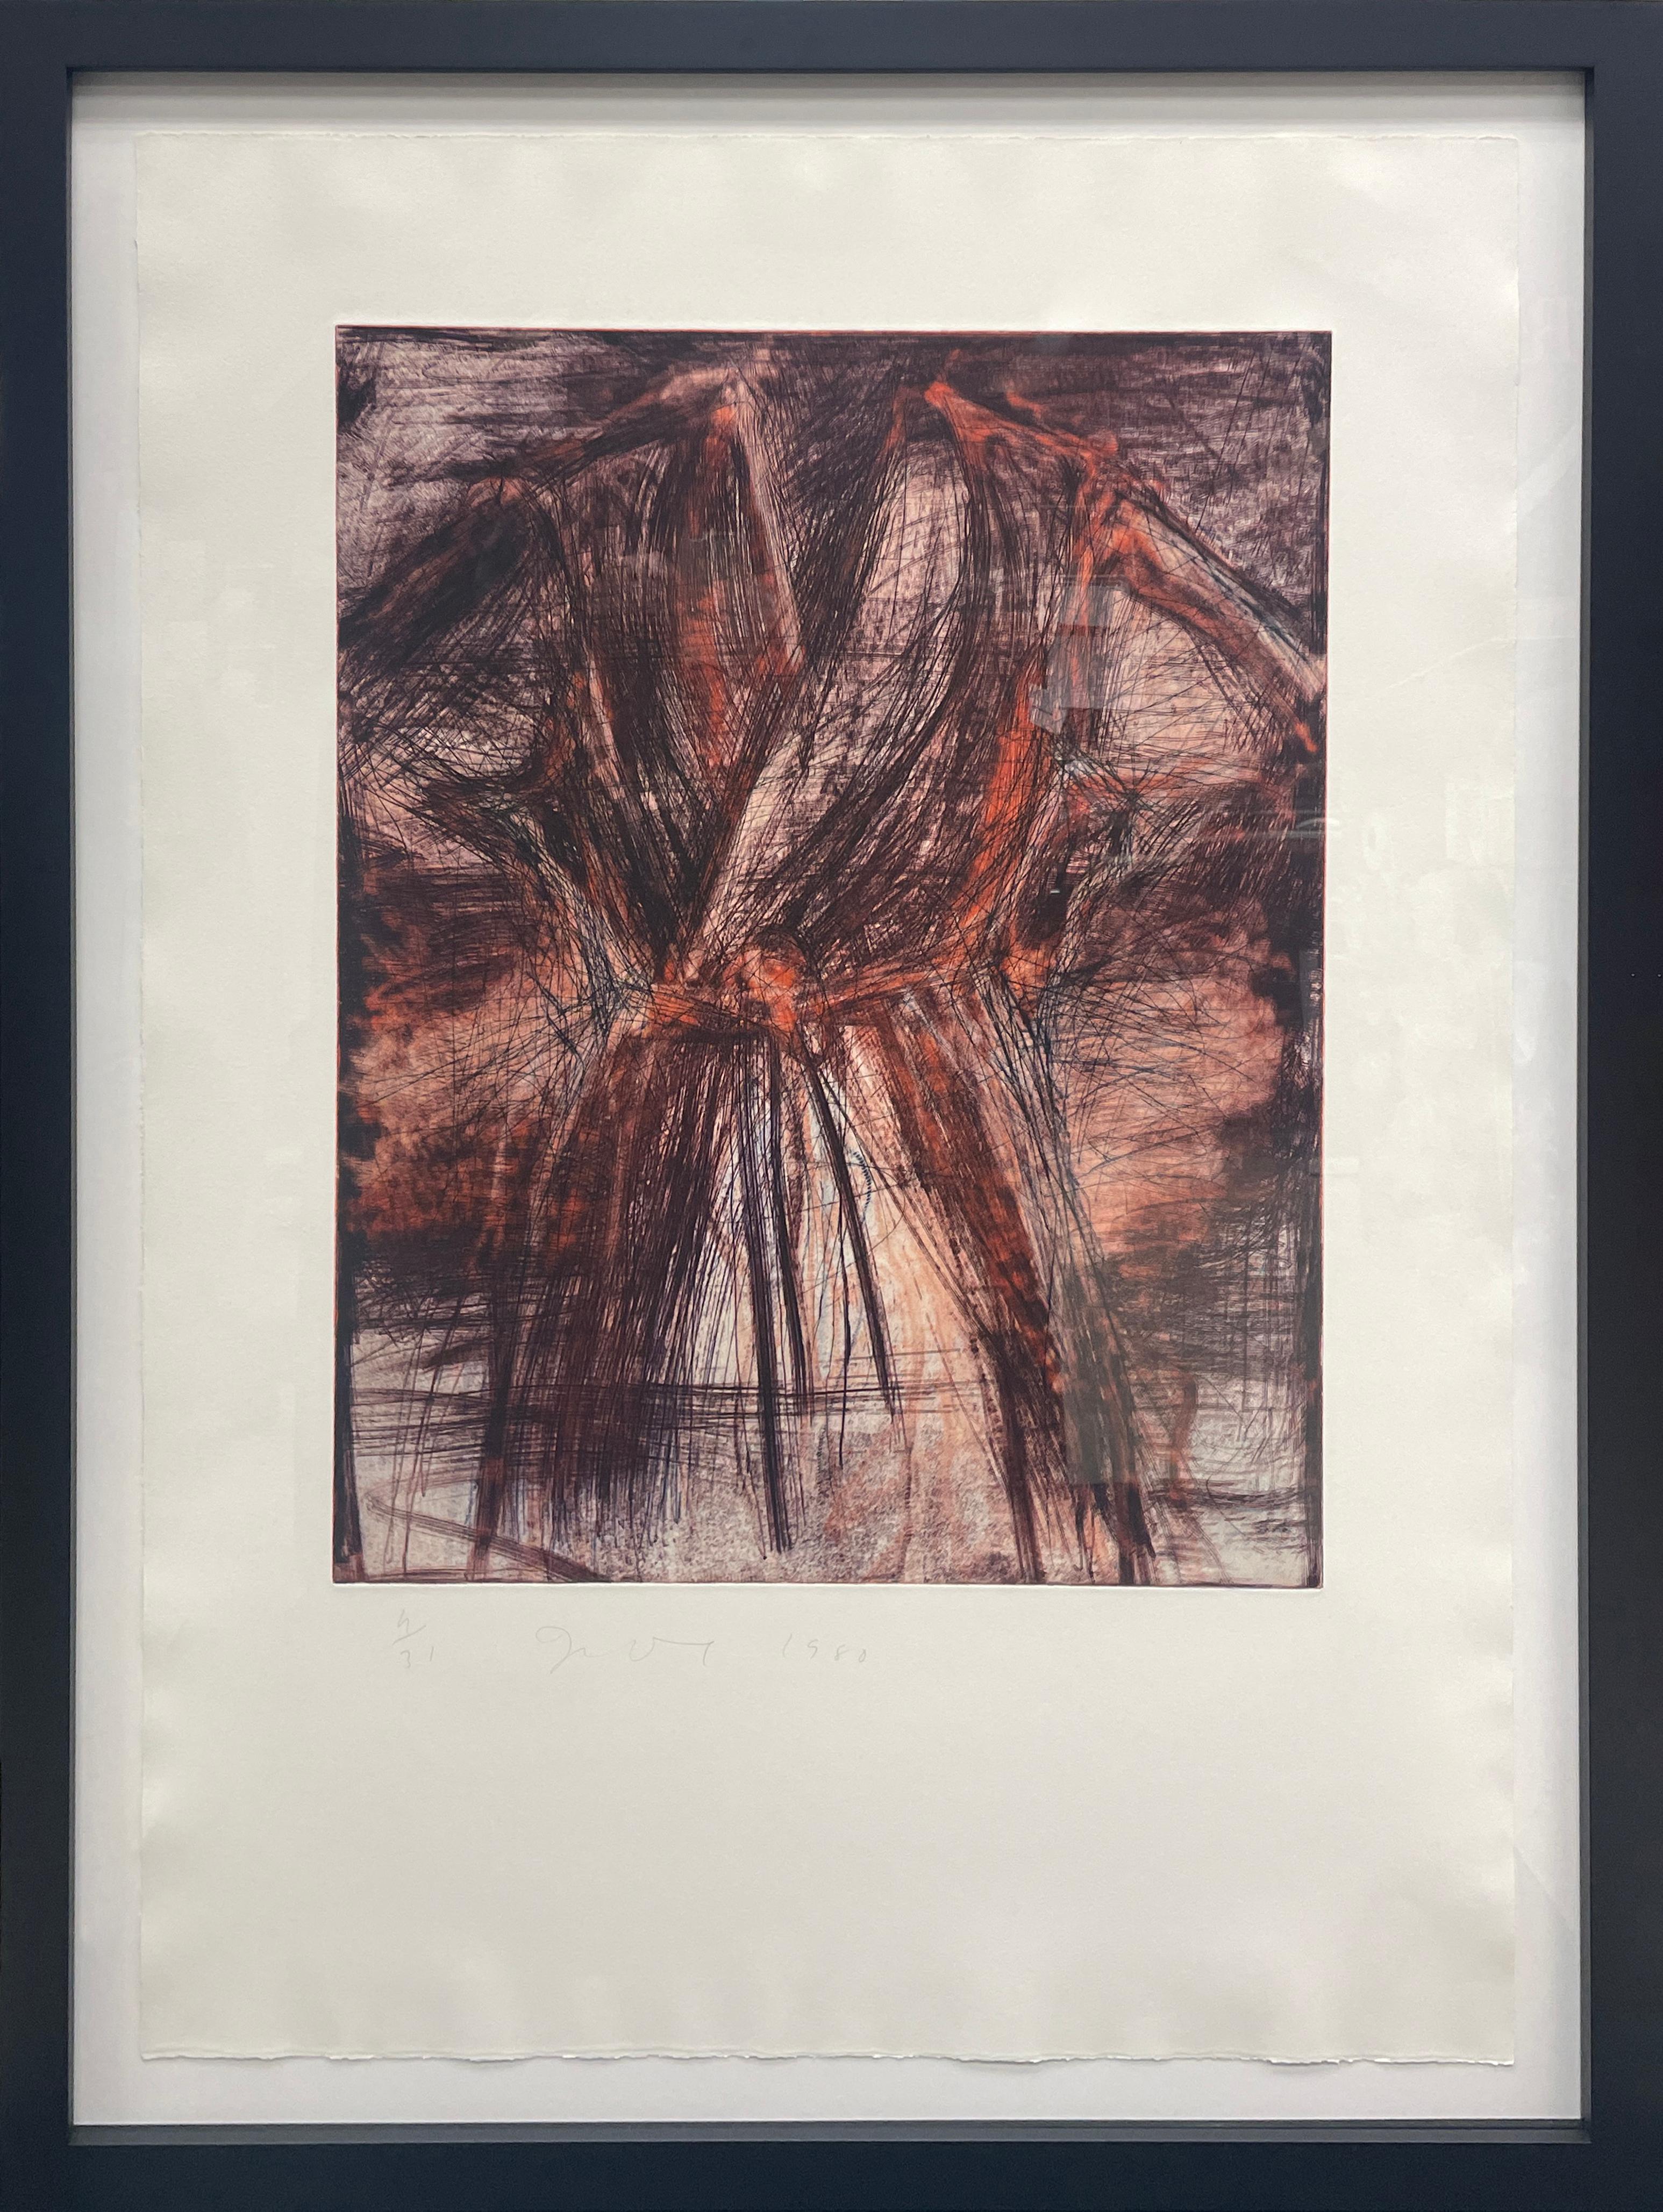  
Jim Dine

Robe in Furnace

Original etching in colors on copperplate deluxe paper
From the rare, limited edition impression 4 of 31
Hand signed by artist and numbered
Image Size 27.75 x 21.6 in (70.5 x 54.9 cm)
Sheet Size: 42.1 X 29.5 in (107 x 75